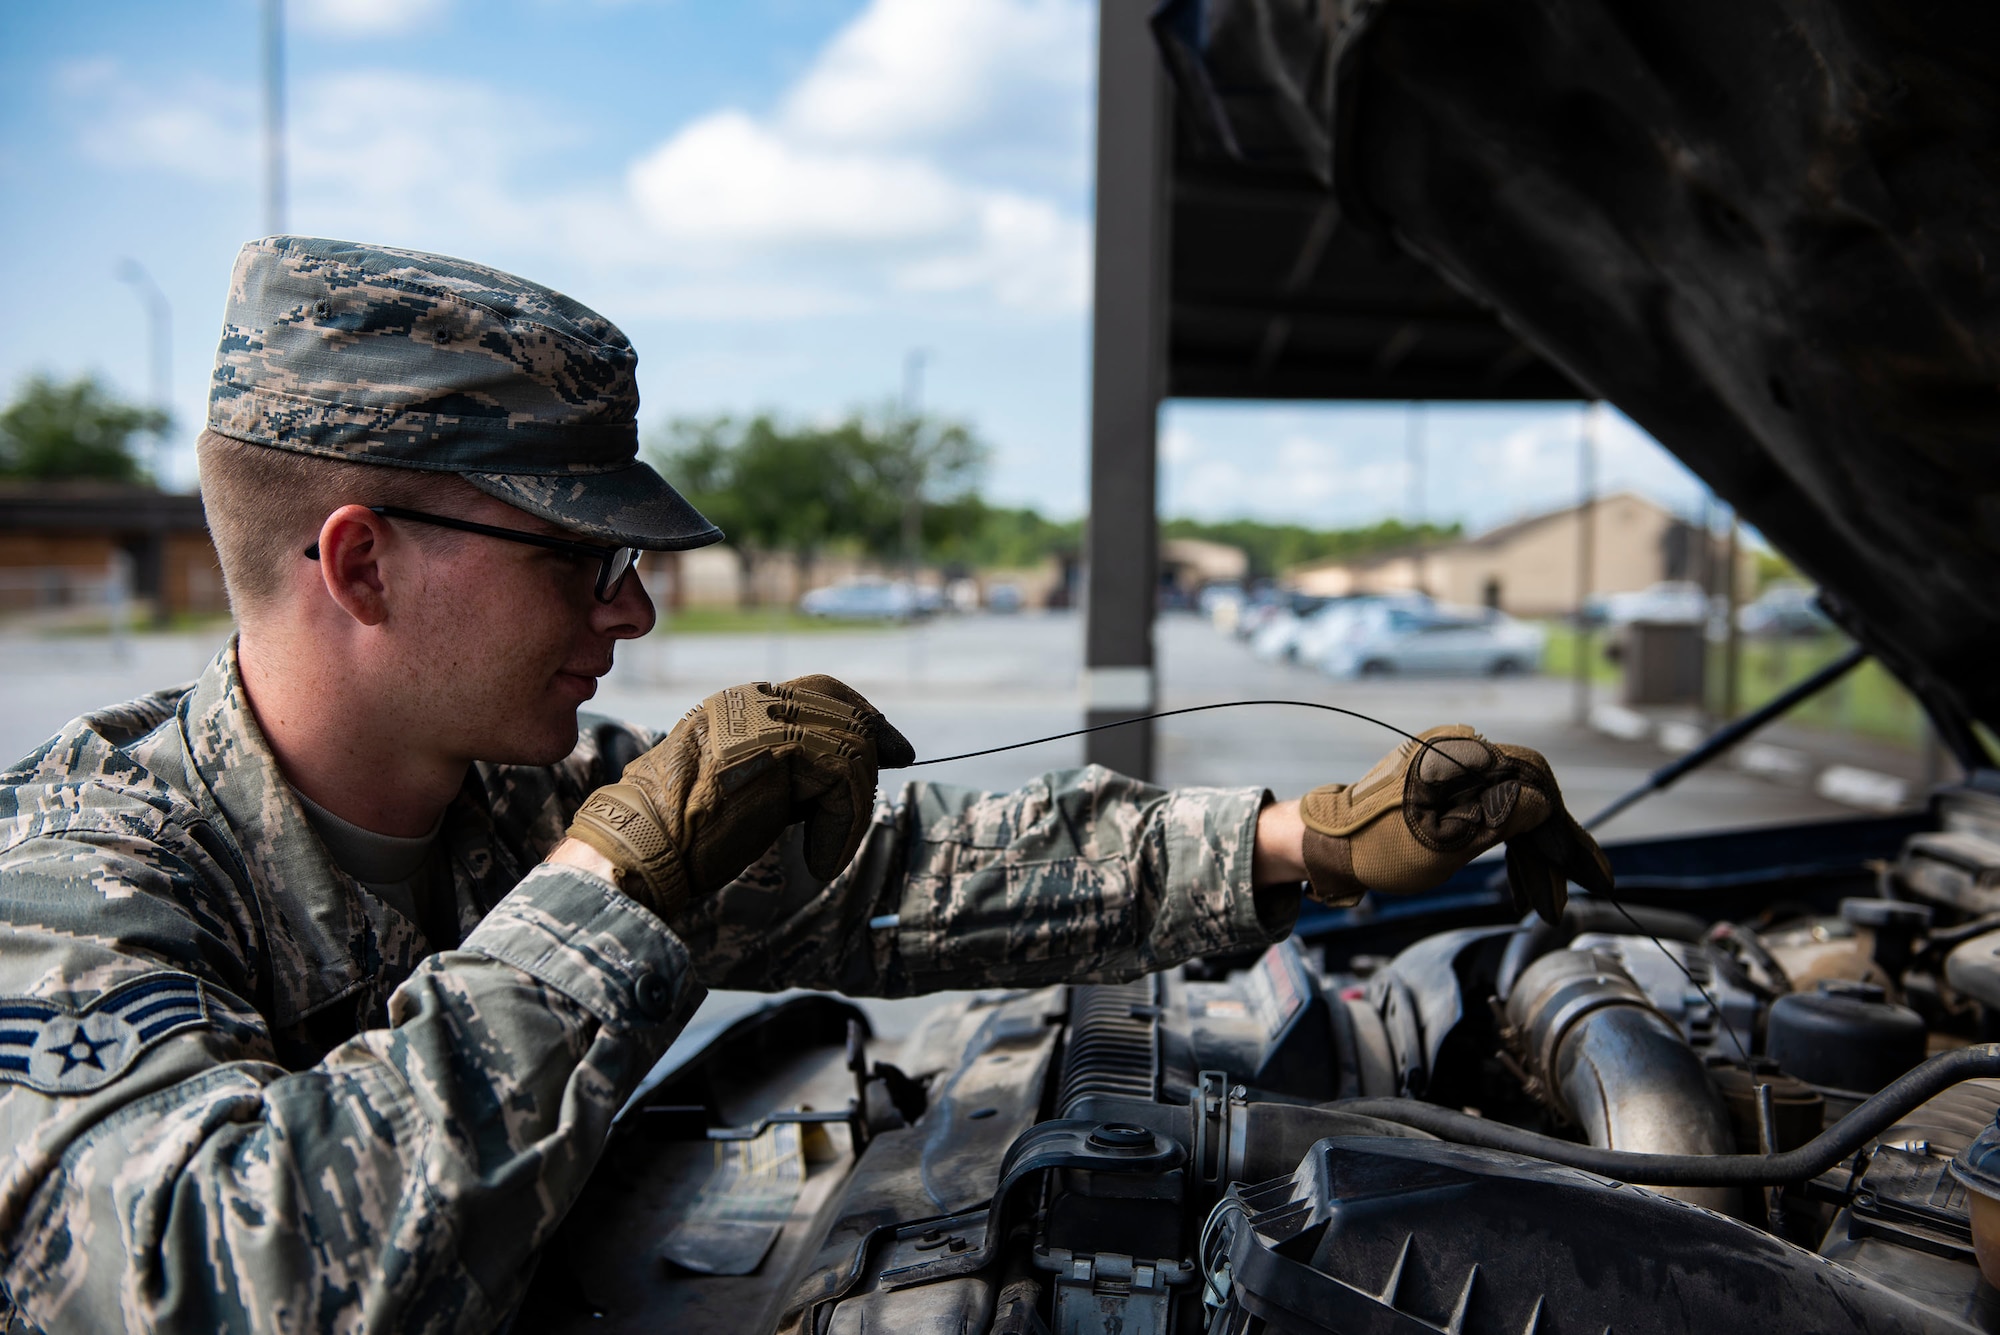 Senior Airman Alex Koch, 23d Logistics Readiness Squadron ground transportation operator, checks fluid levels during a vehicle inspection, Aug. 12, 2019, at Moody Air Force Base, Ga. The ground transportation flight inspects and completes preventative maintenance on all of their 56 vehicles weekly to ensure they remain operational as well as to sustain the longevity of the fleet. (U.S. Air Force photo by Senior Airman Erick Requadt)